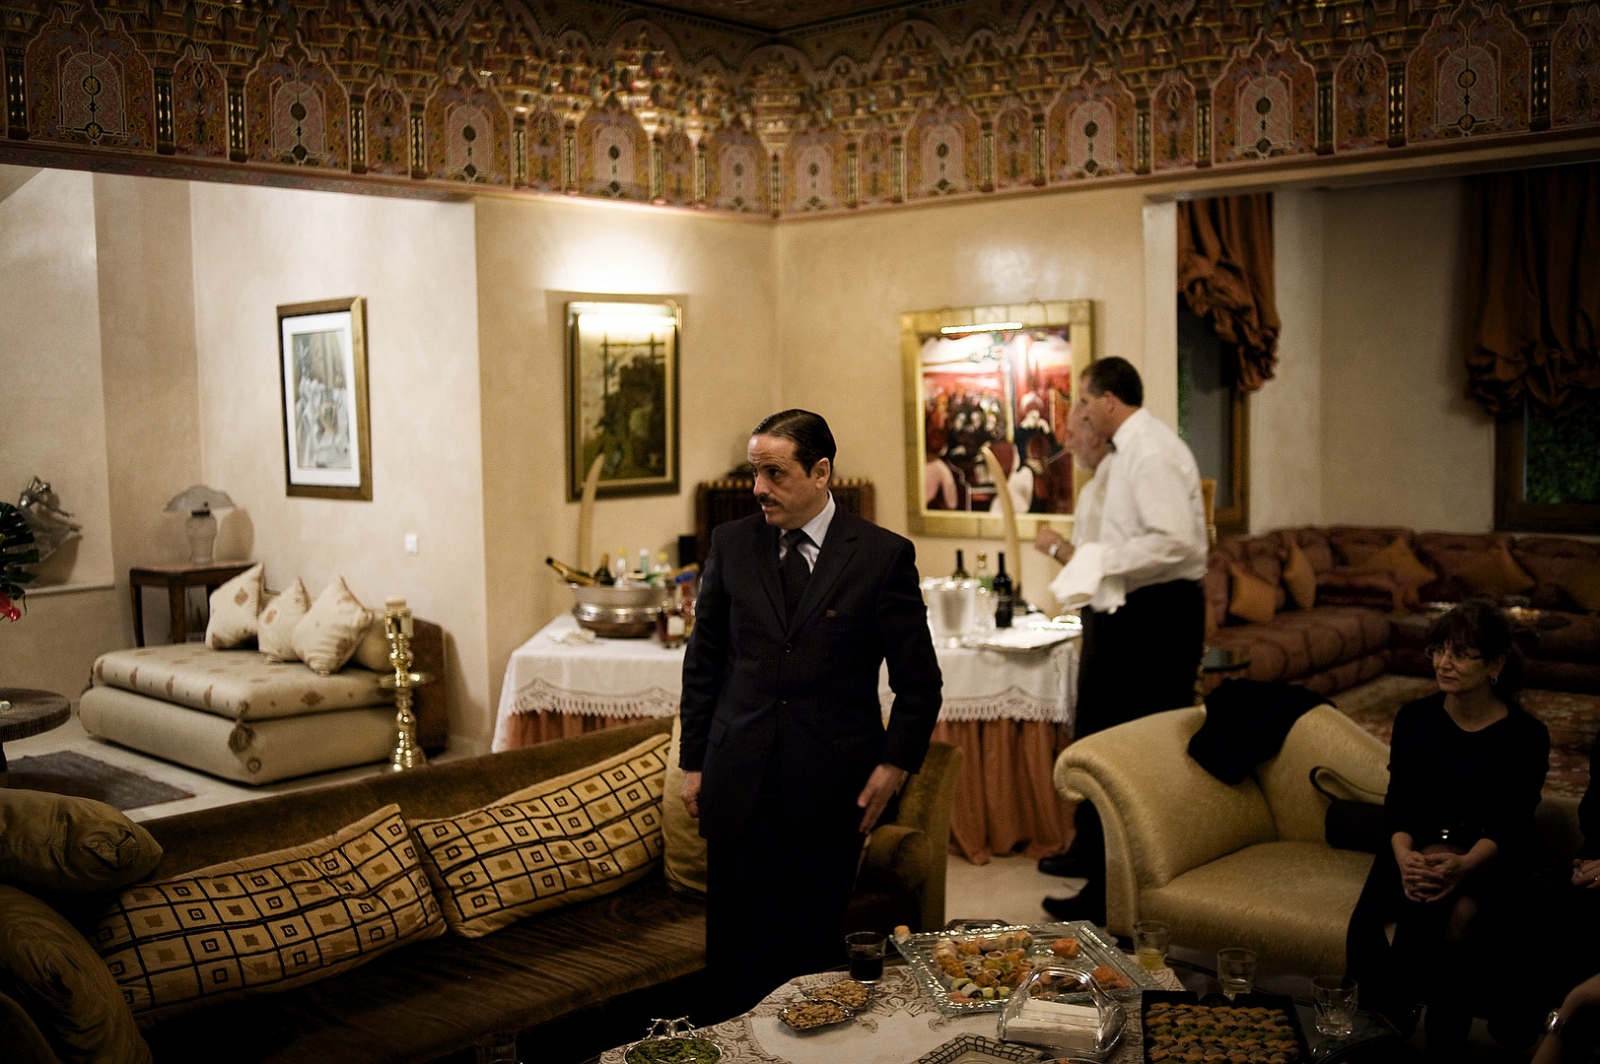  2010 - A wealthy Moroccan Jewish family holds a party for the Mamouna festival in Casablanca...